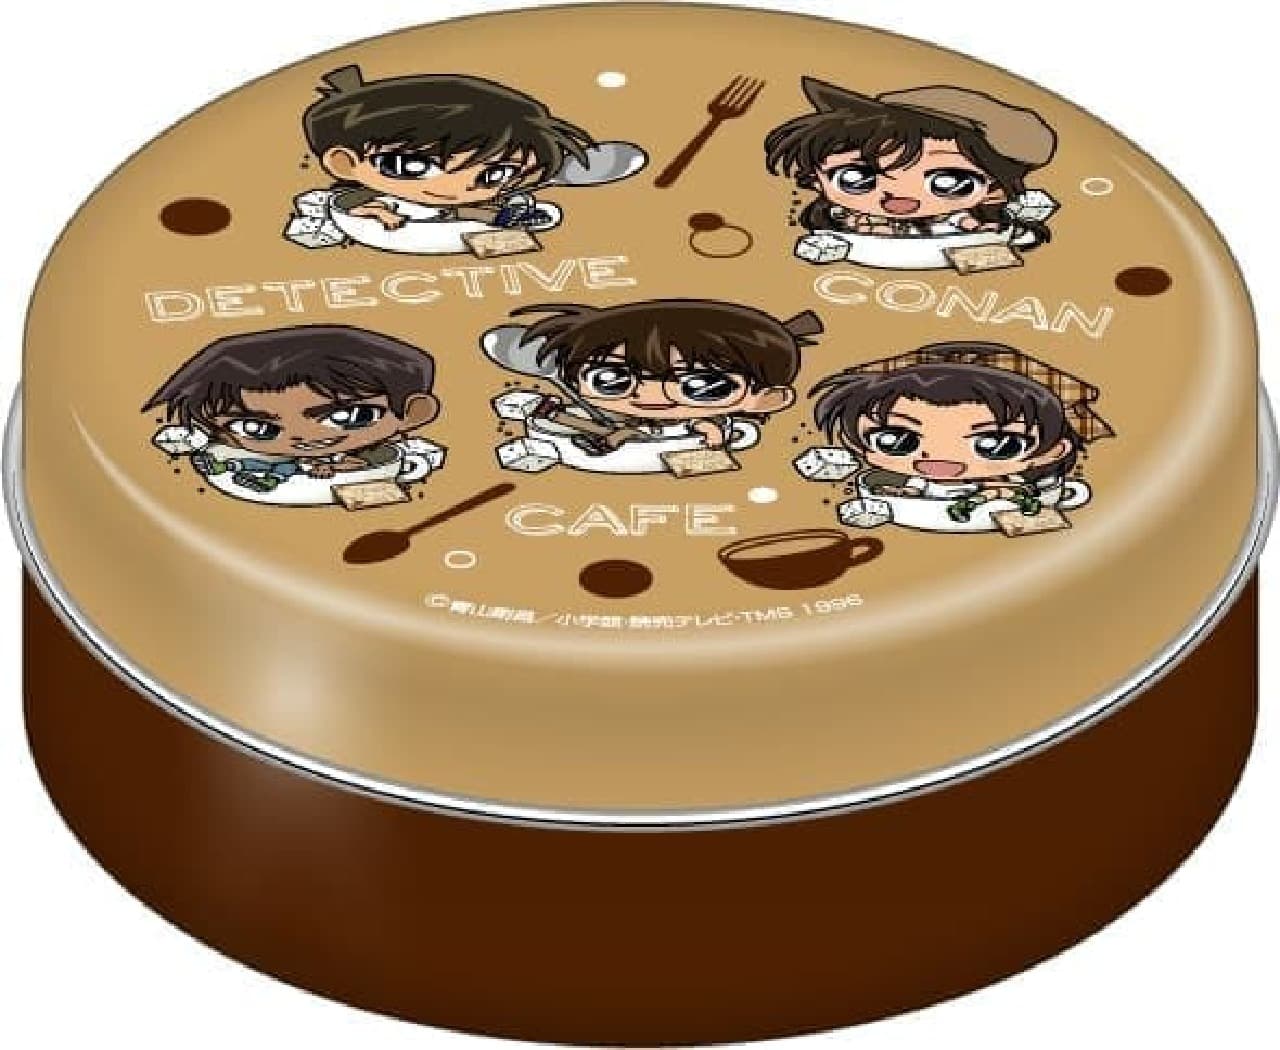 Detective Conan Cafe Canned Chocolate